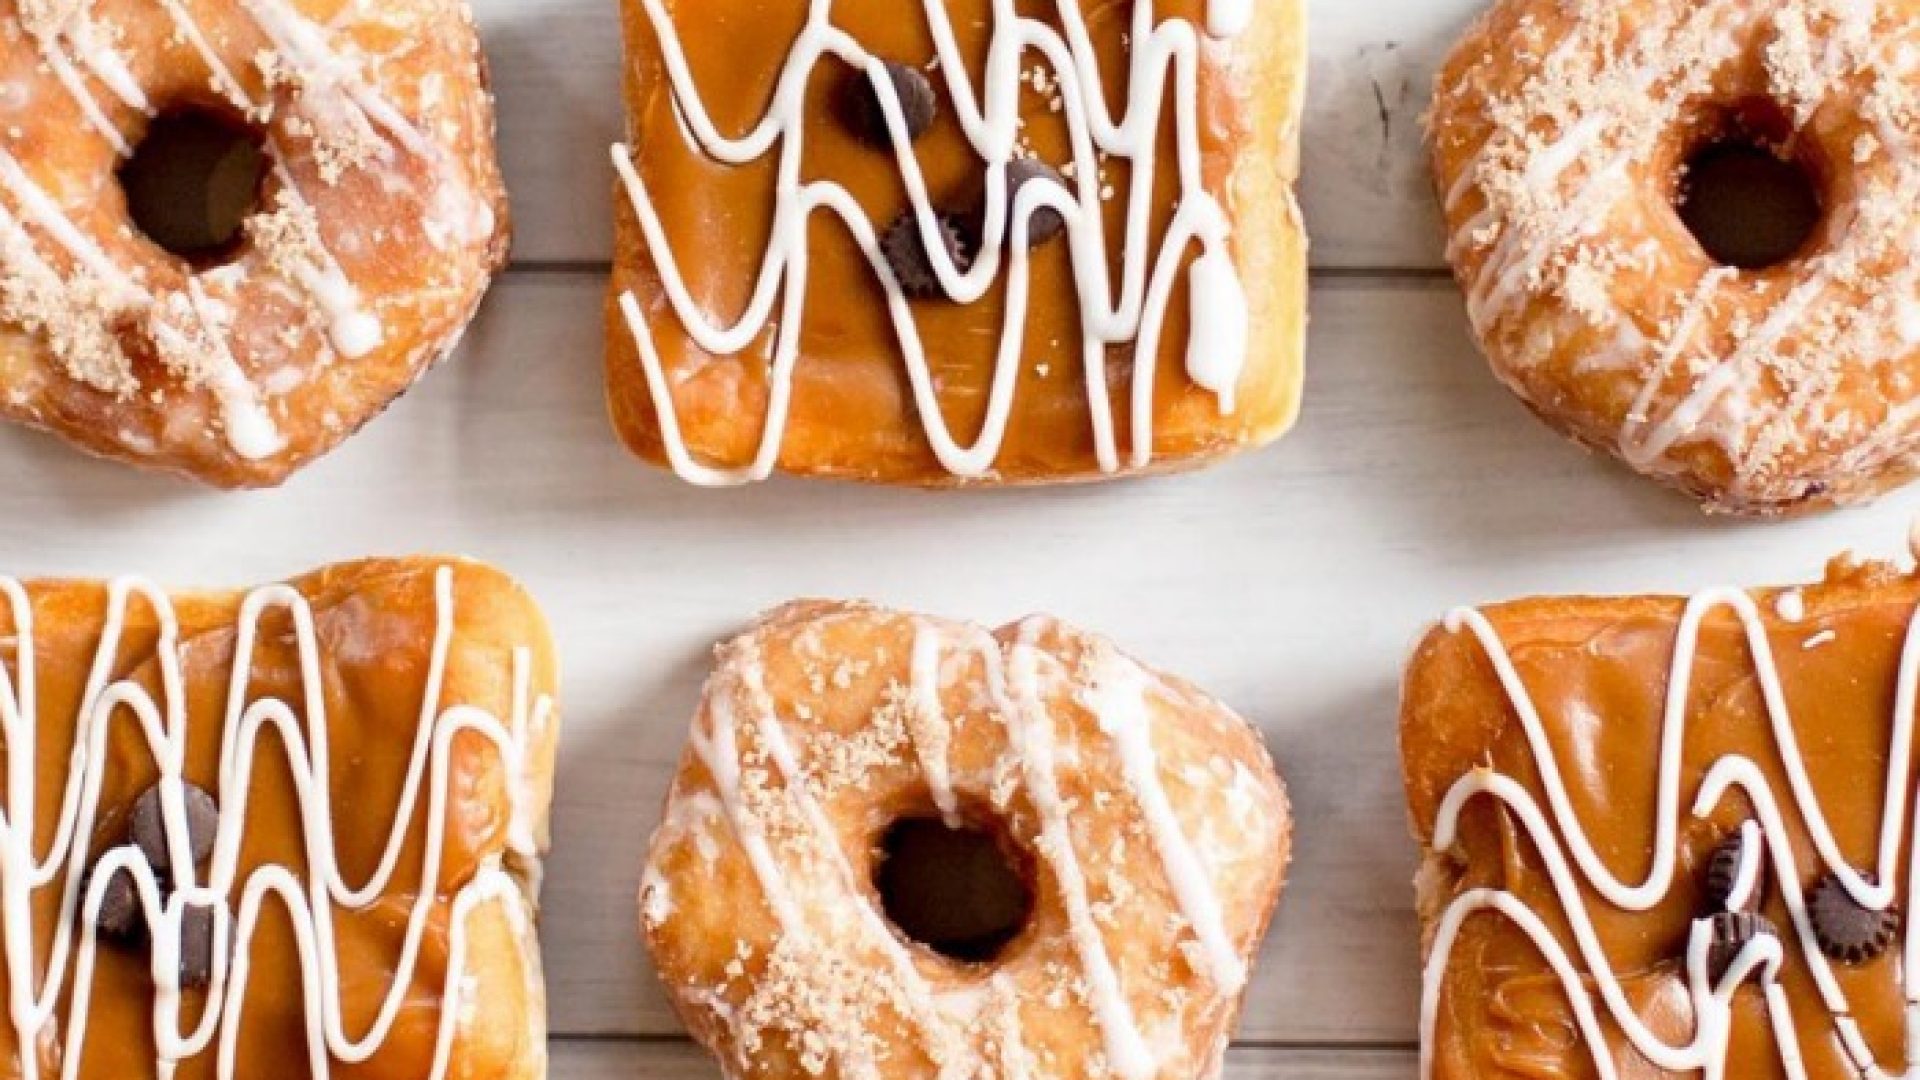 Dunkin Donuts Added These Tasty Treats To Their Menu For Summer And We Want Them All